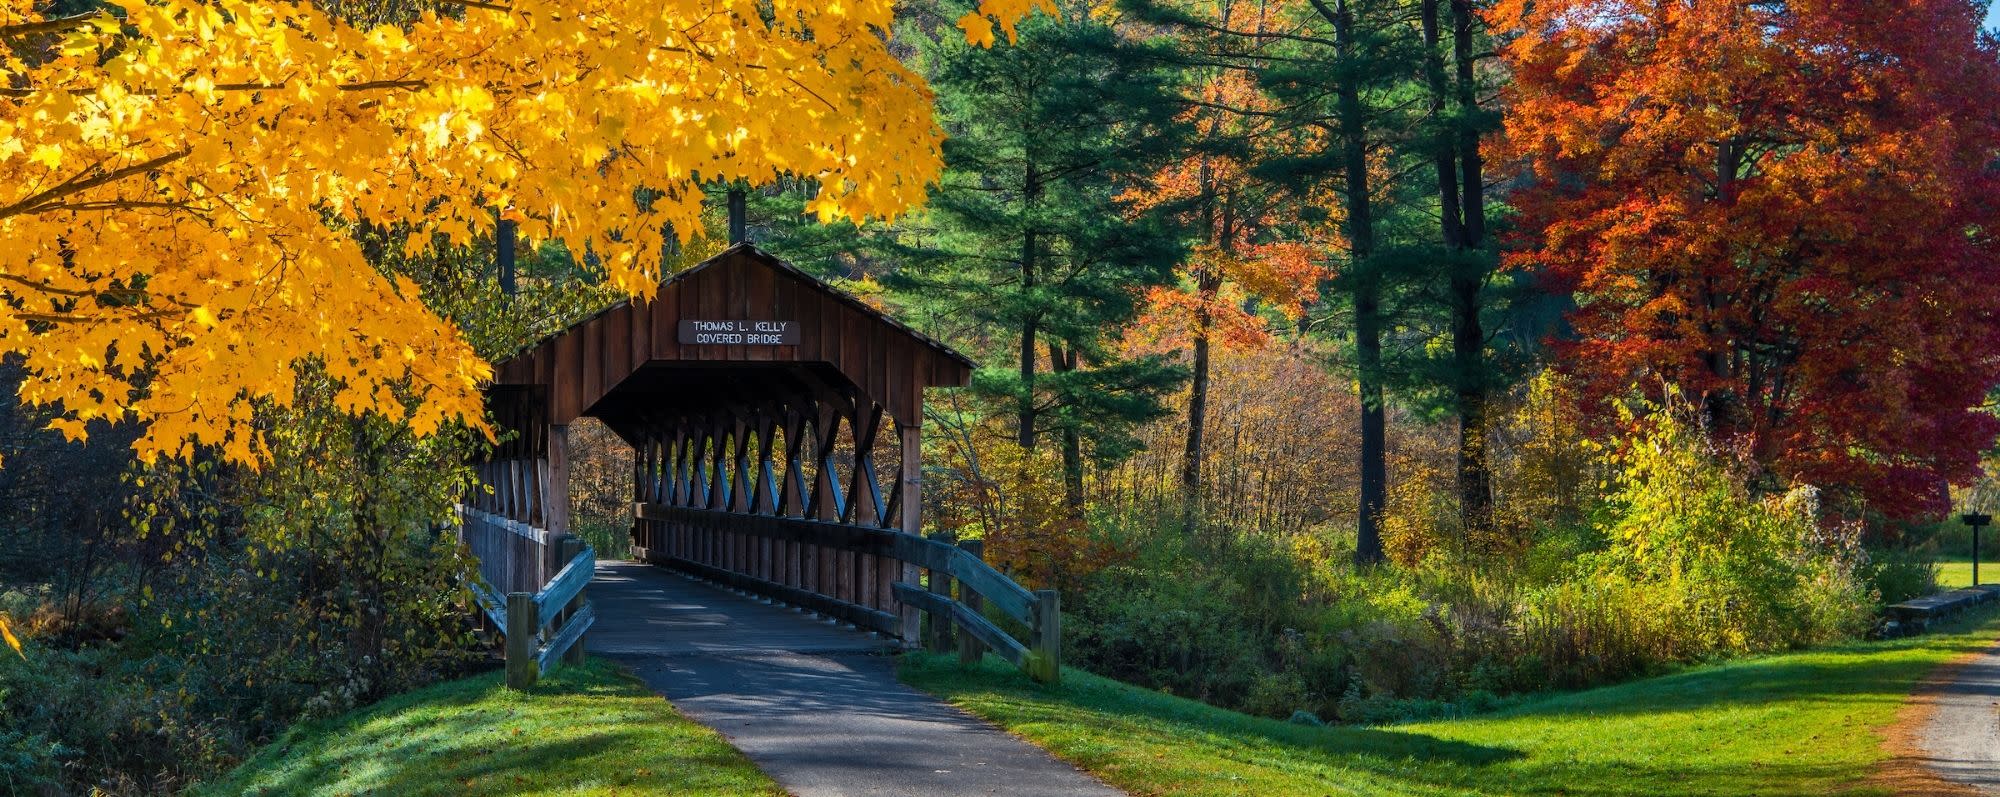 The Thomas L. Kelly Covered Bridge surrounded by fall foliage colors of yellow, green and orange